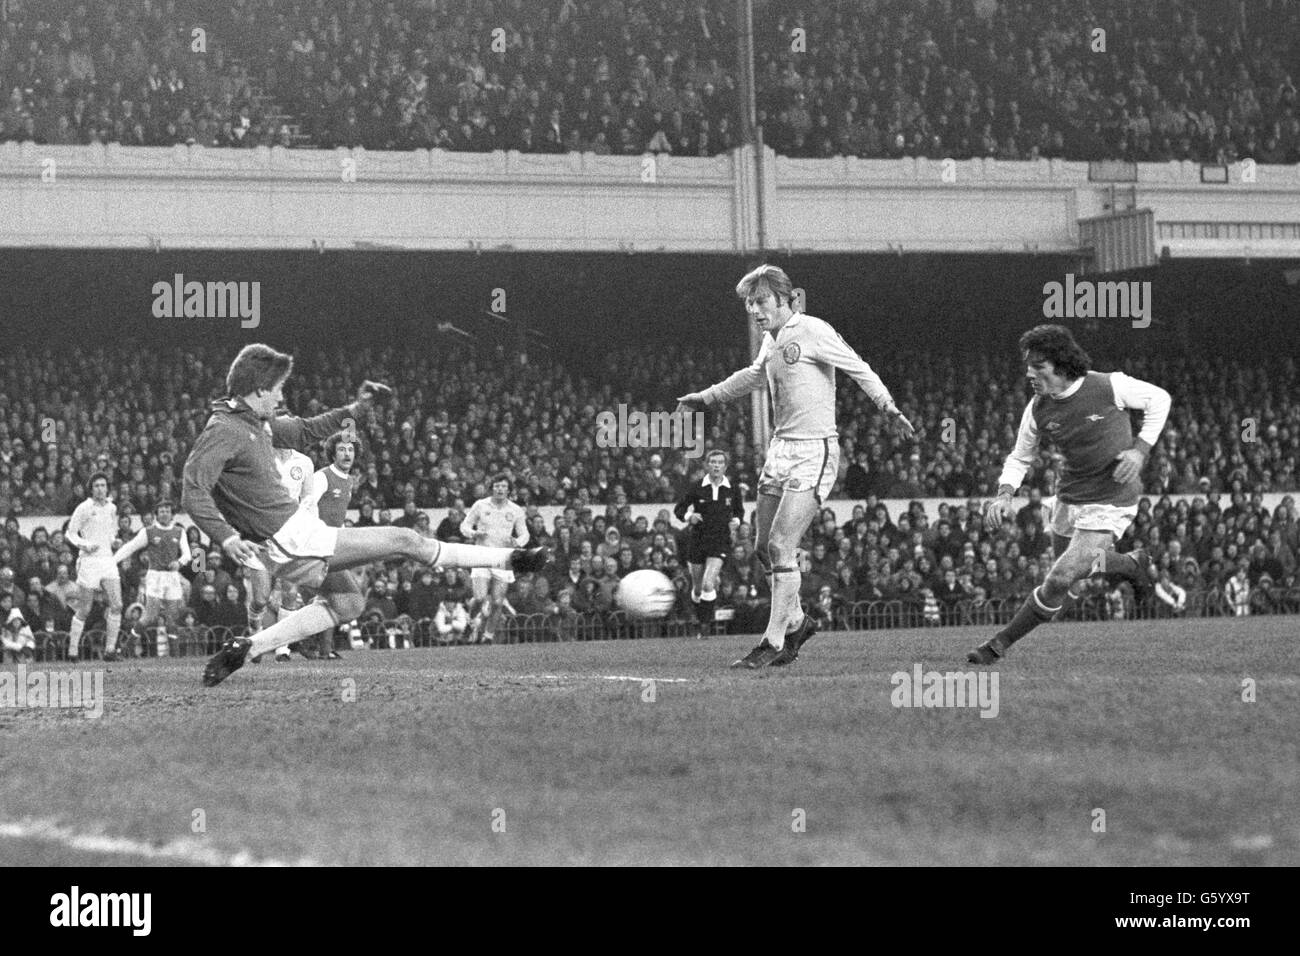 Leeds United keeper John Lukic boots away an Arsenal attack during a League One encounter at Highbury. Arsenal's Frank Stapleton is on the right, with Brian Greenhoff of Leeds in the middle. Stock Photo